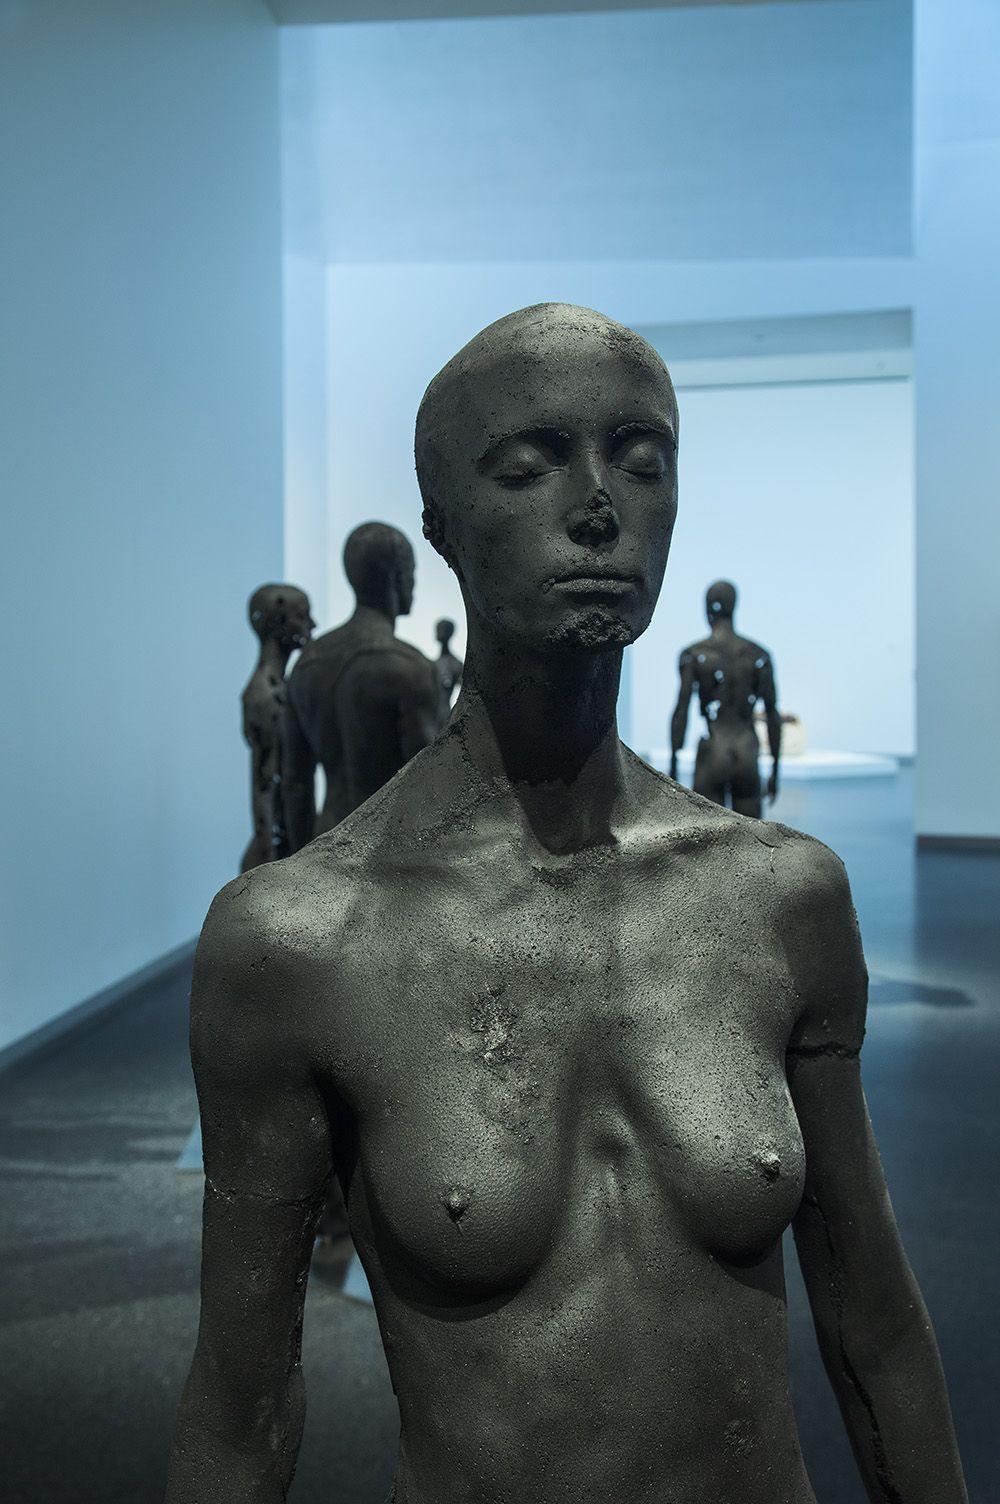 The Presence of Absence - Female (I) by Tom Price - Sculpture en charbon, corps nu en vente 1